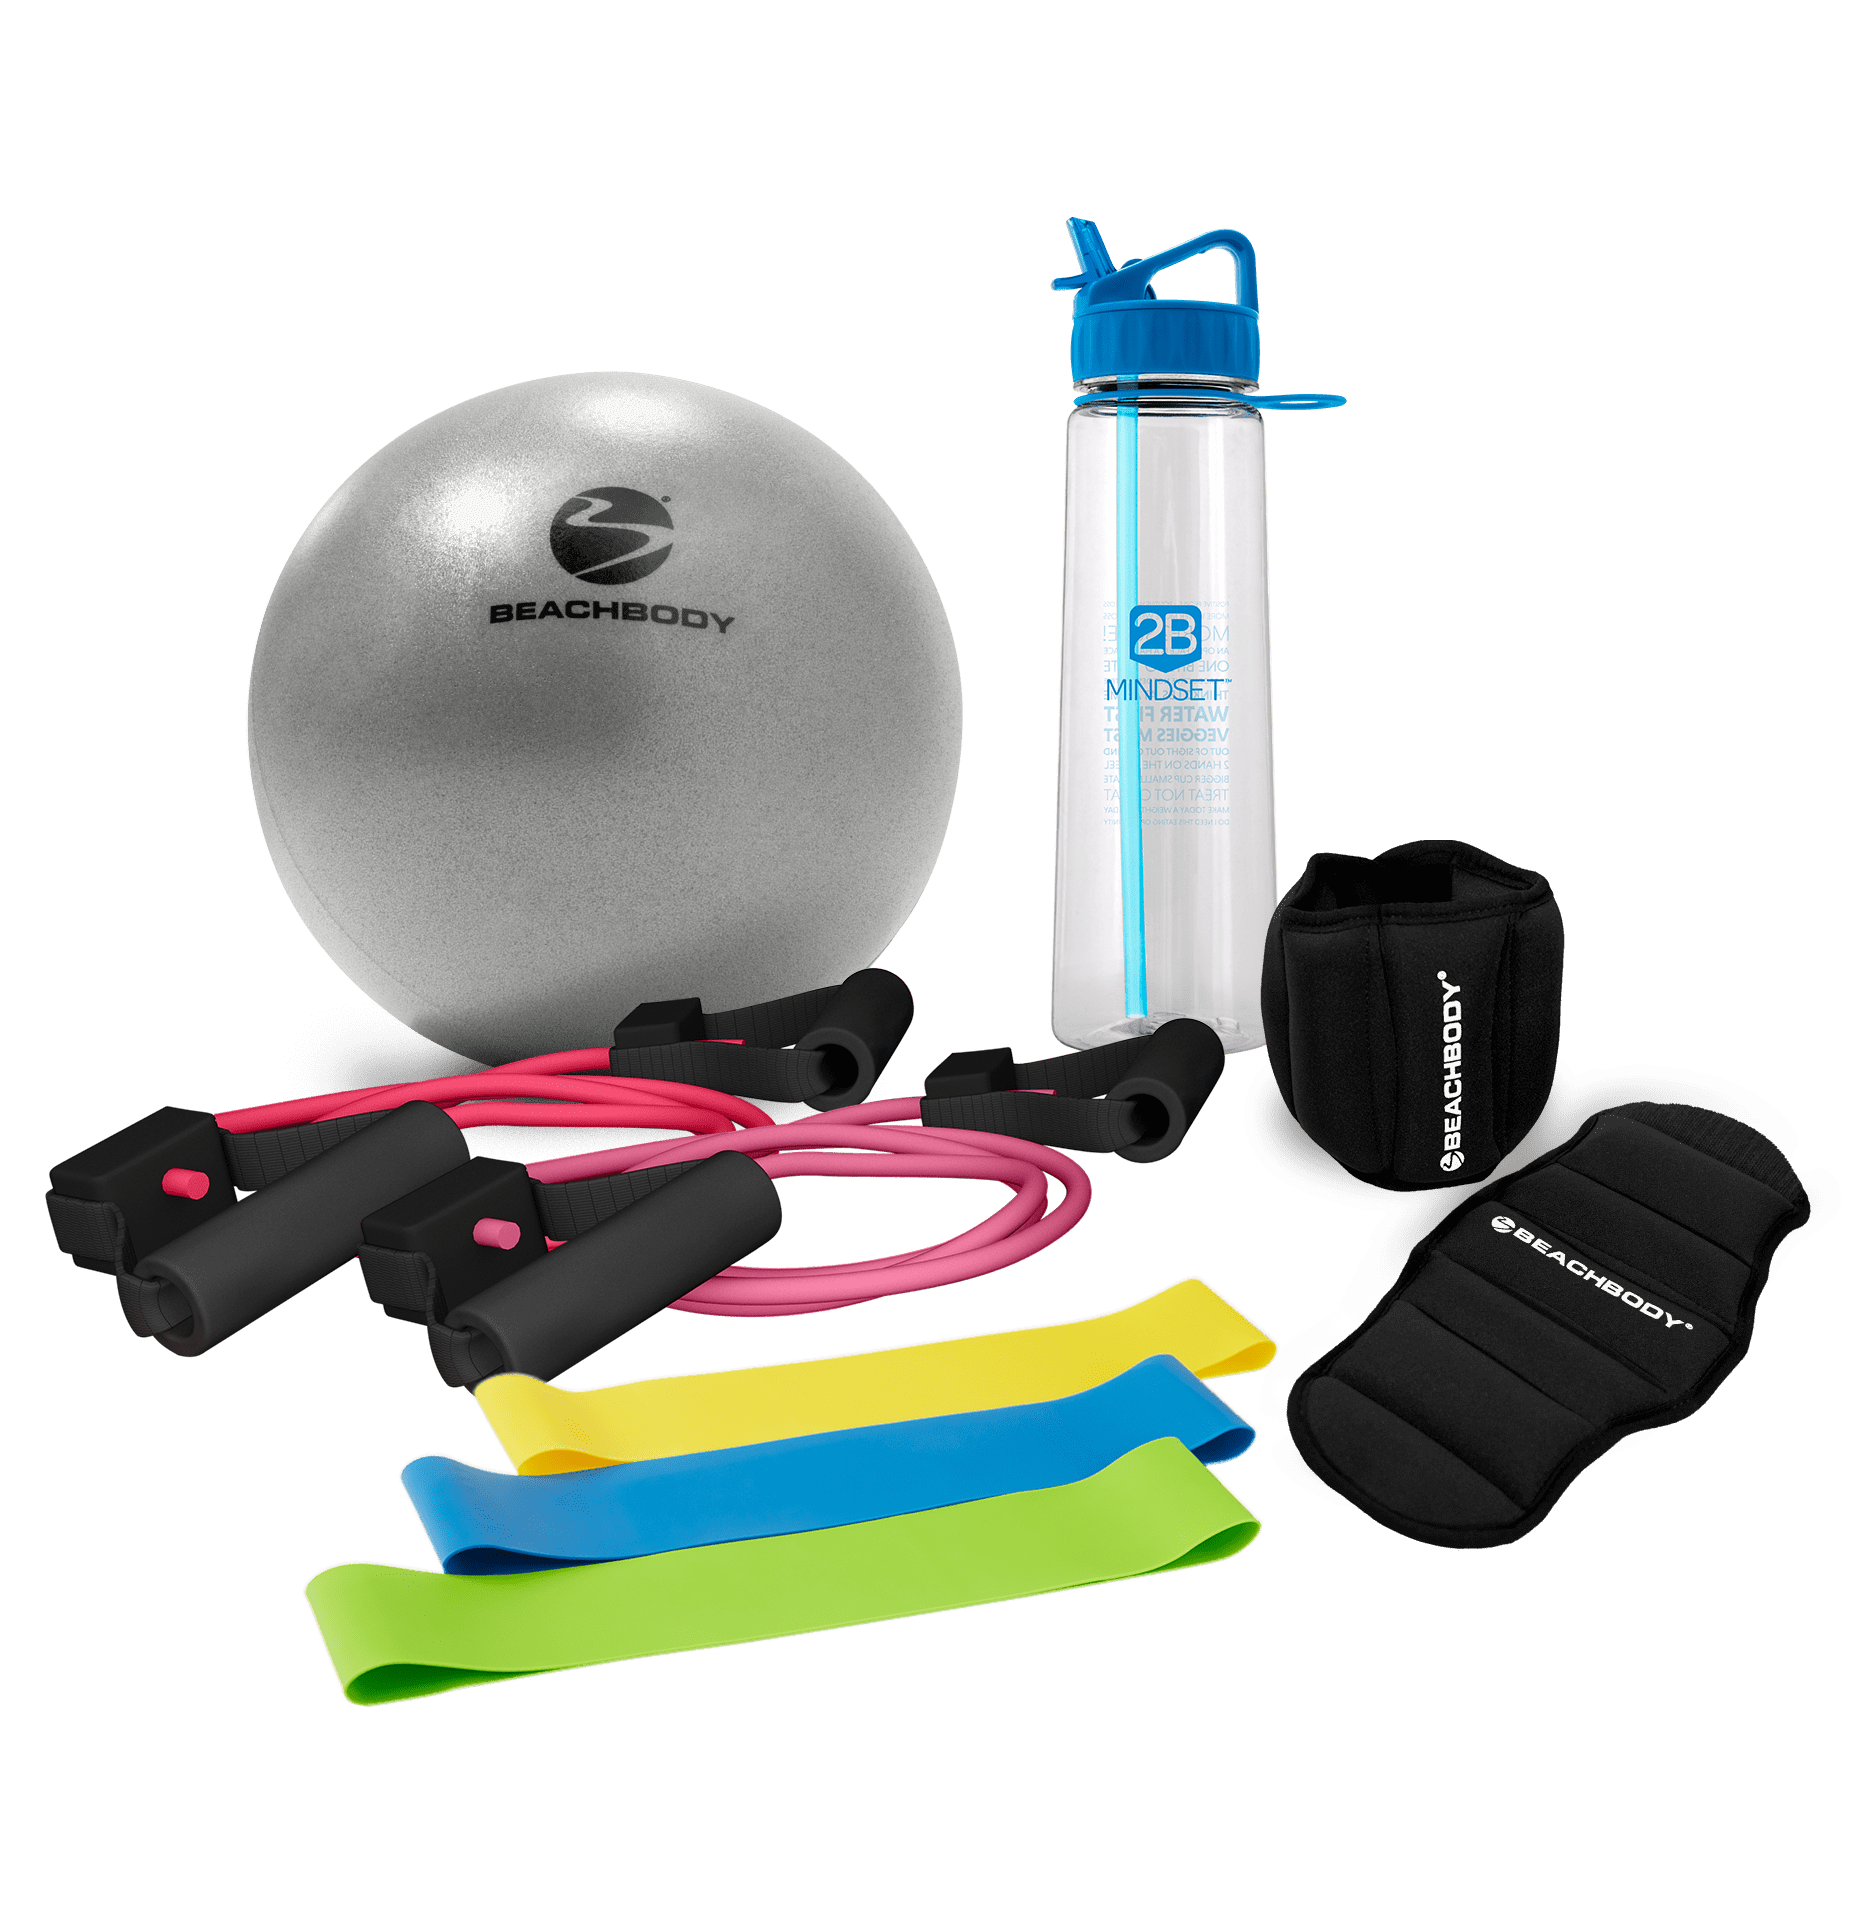 The Complete Workout Kit for Beginners - Cityline